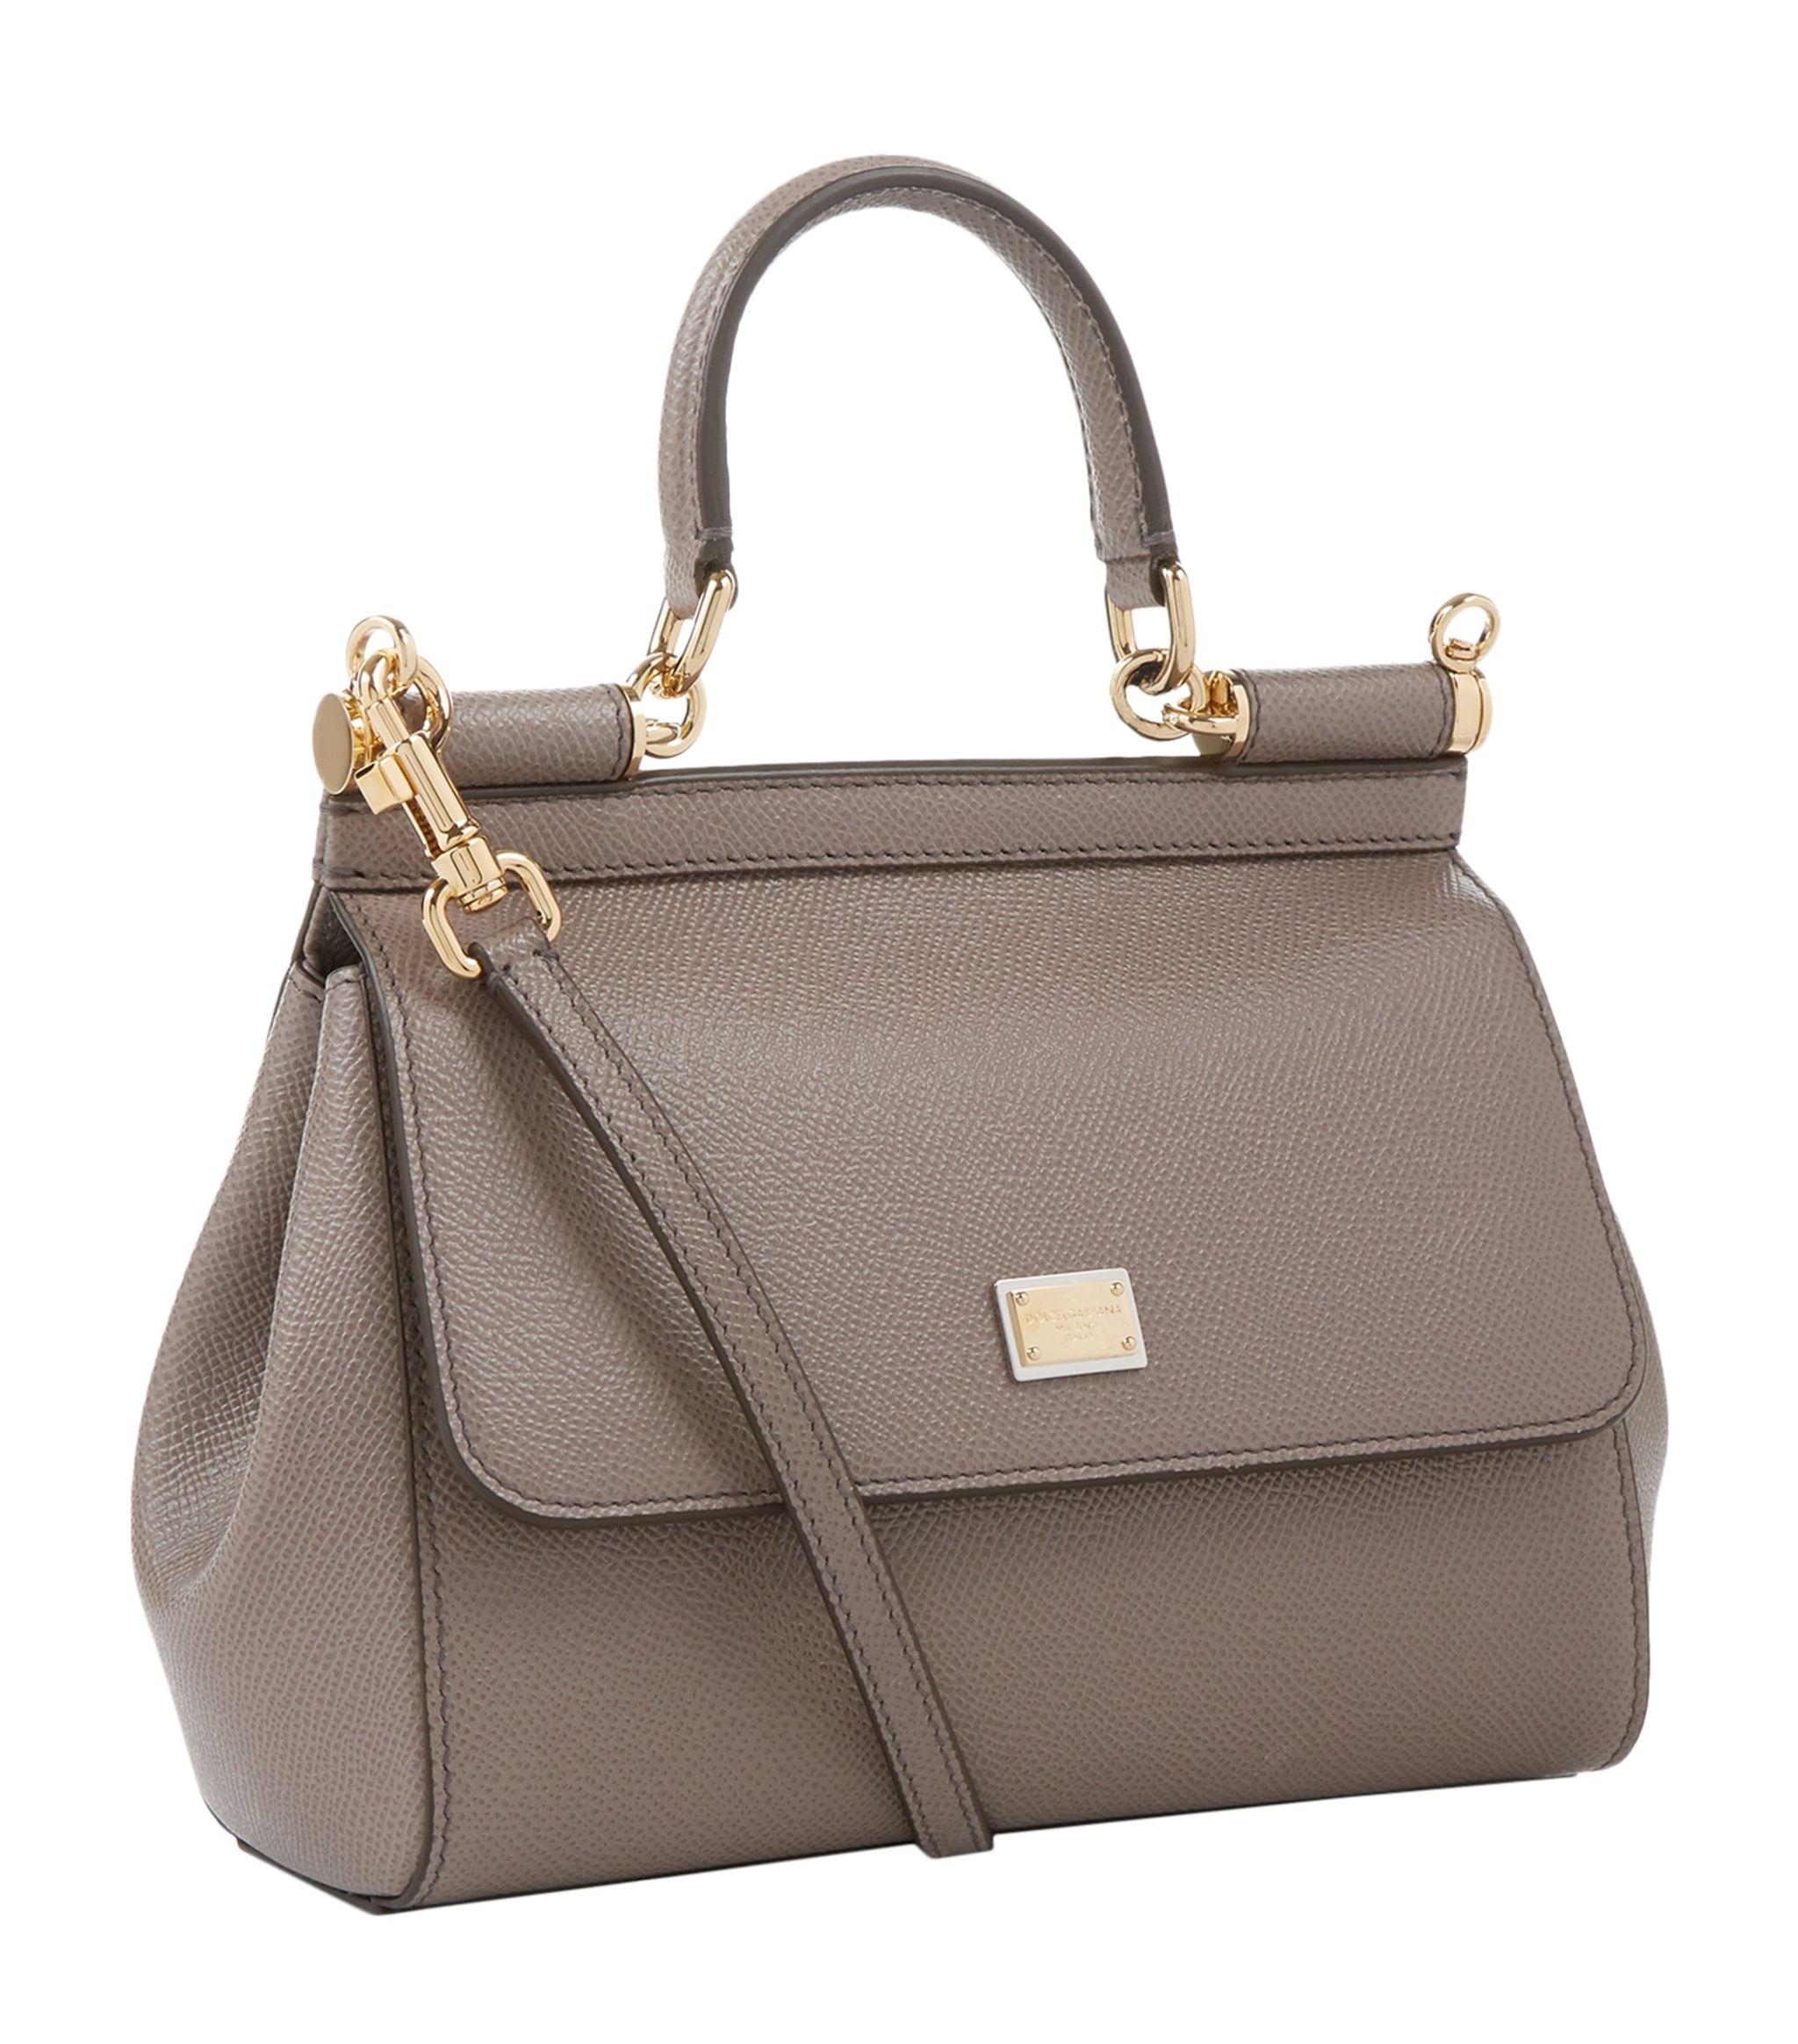 Dolce & Gabbana Leather Small Sicily Top-handle Bag in Brown - Lyst